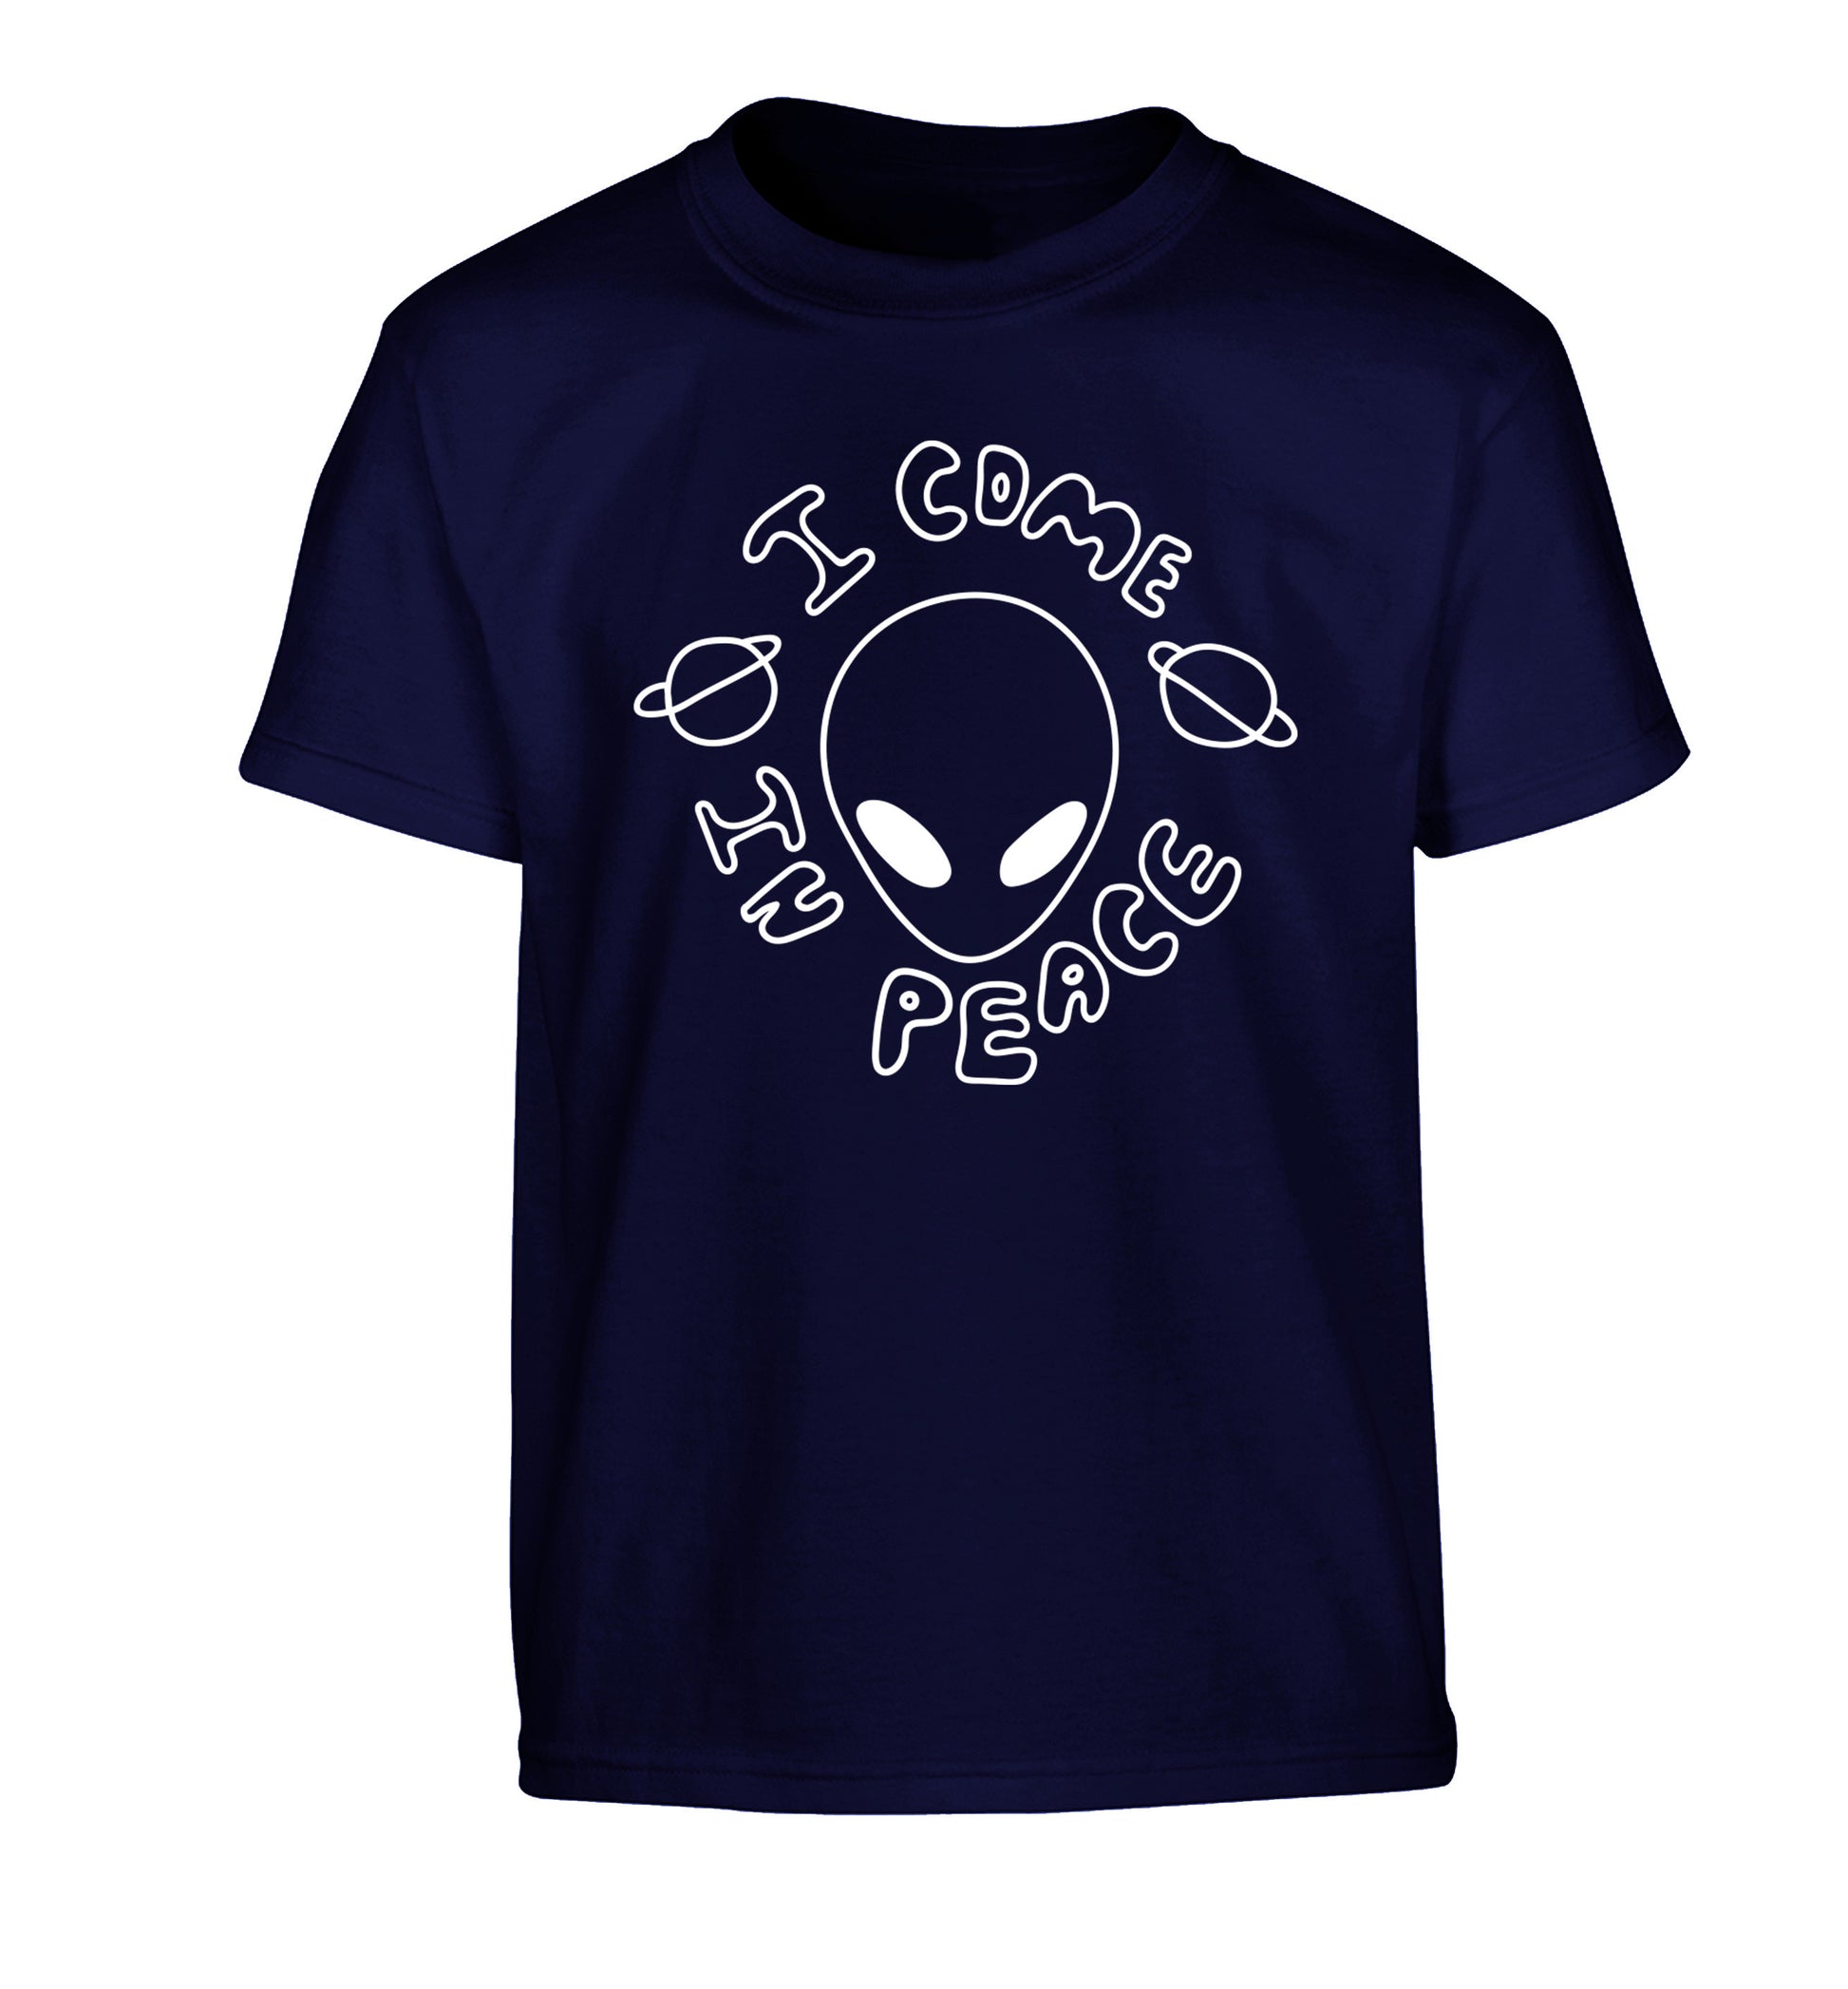 I come in peace Children's navy Tshirt 12-14 Years